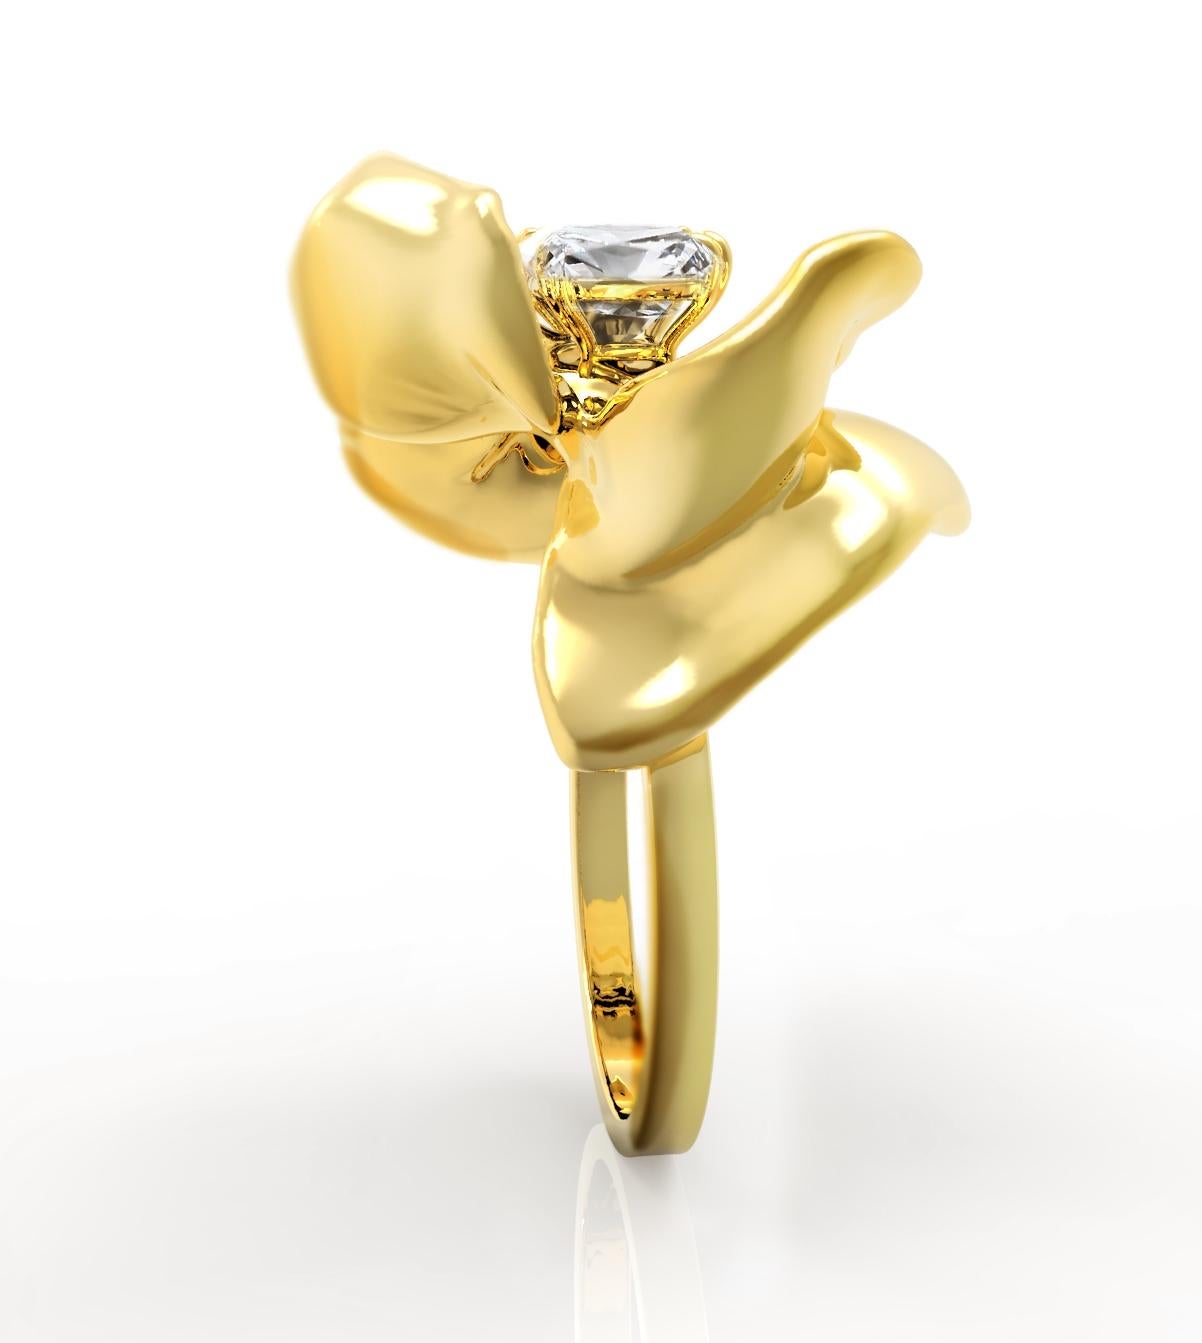 This 18 karat yellow gold Magnolia Flower engagement ring features a big cushion diamond with excellent characteristics. The placement of the diamond in the yellow gold setting resembles a firebird in this shape, complementing the sparkle of the